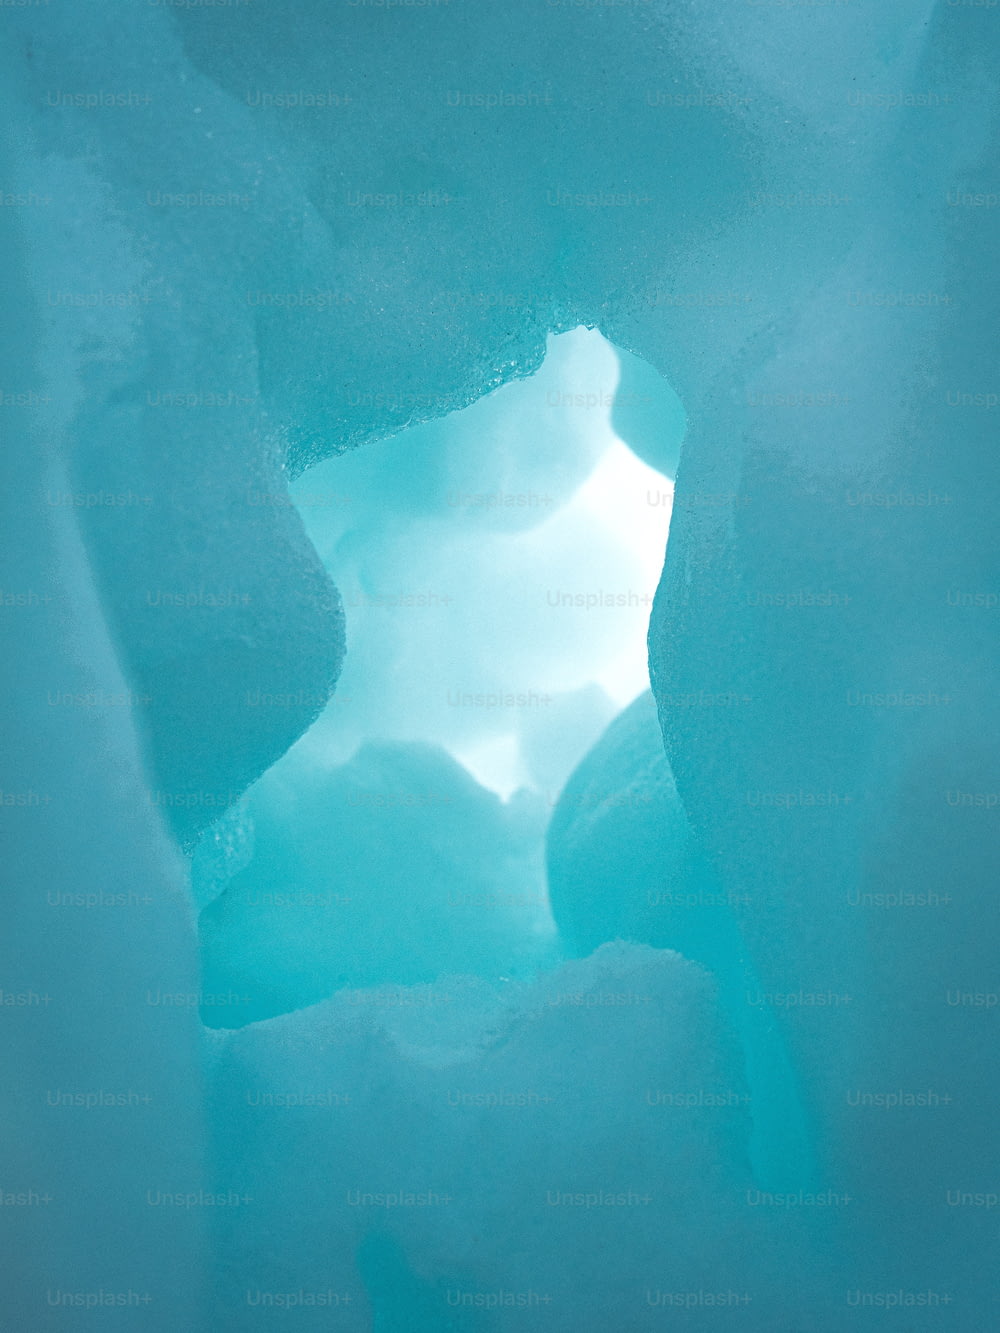 a large ice cave